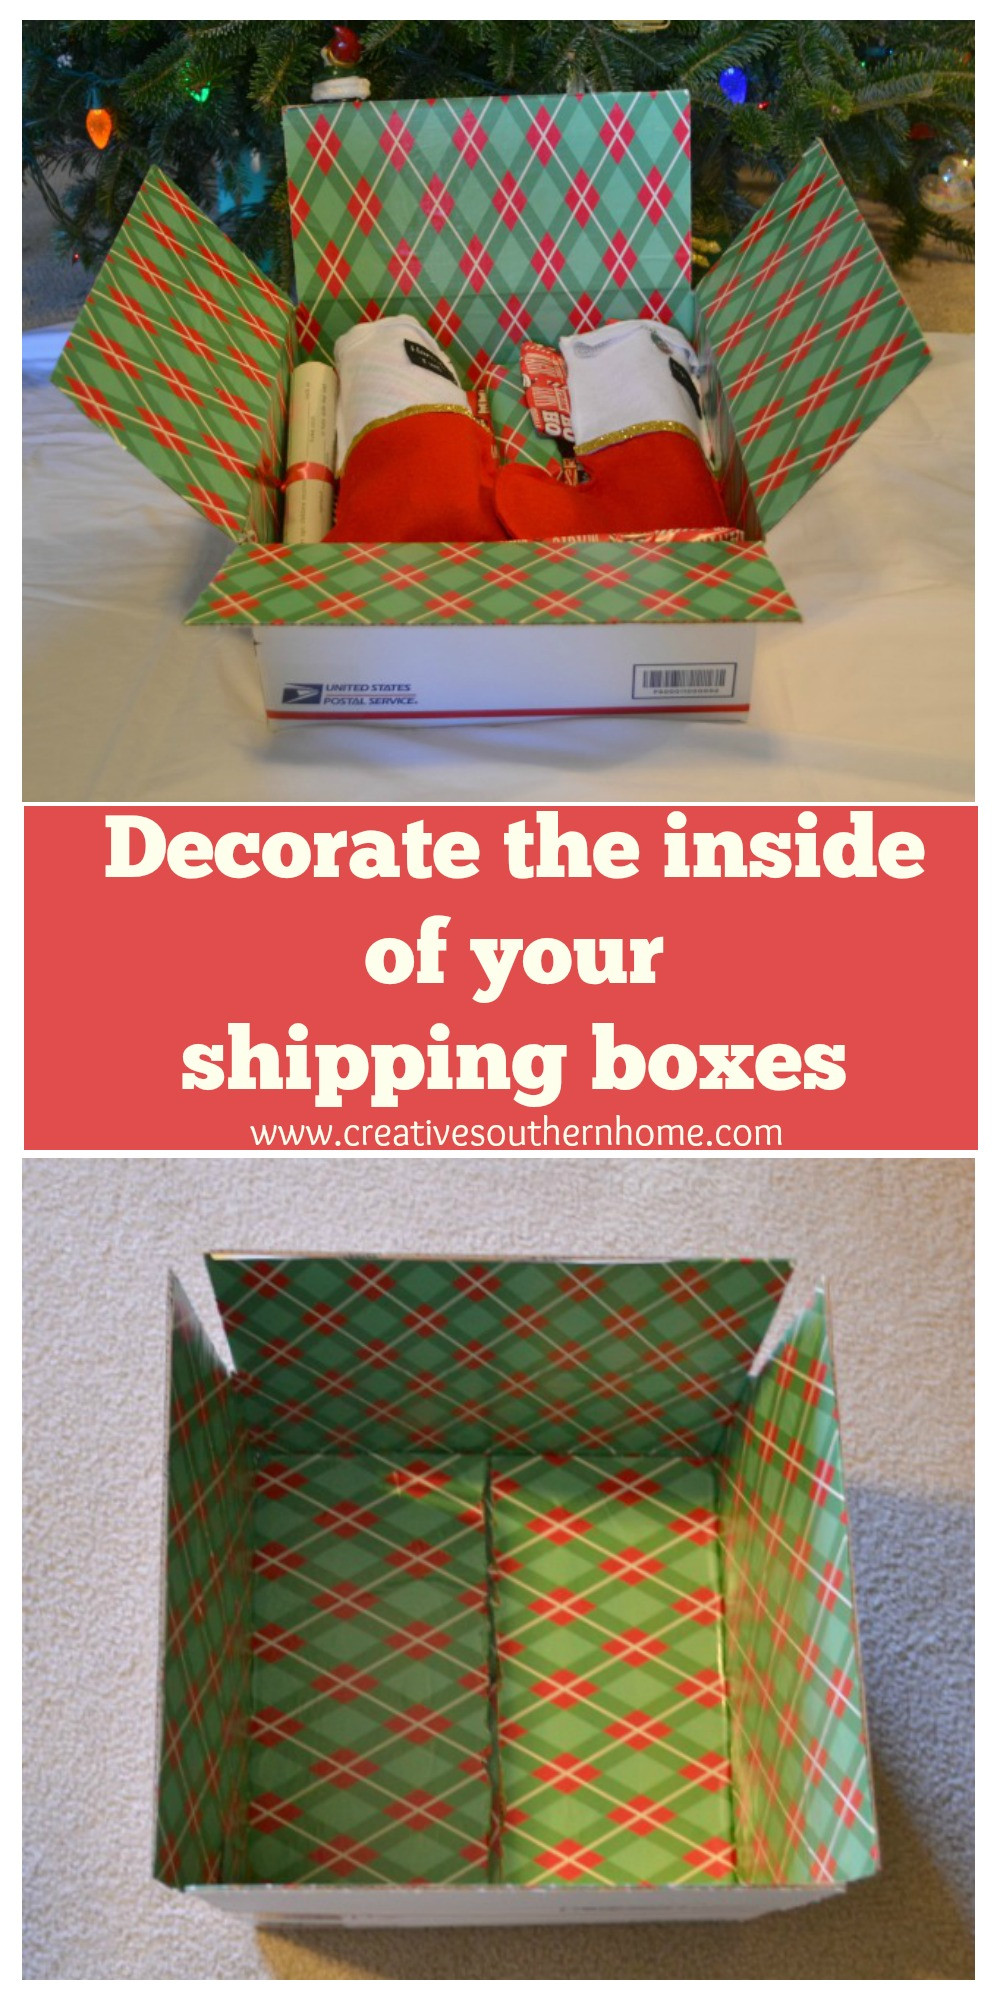 DIY Shipping Boxes
 decorate the inside of your shipping boxes